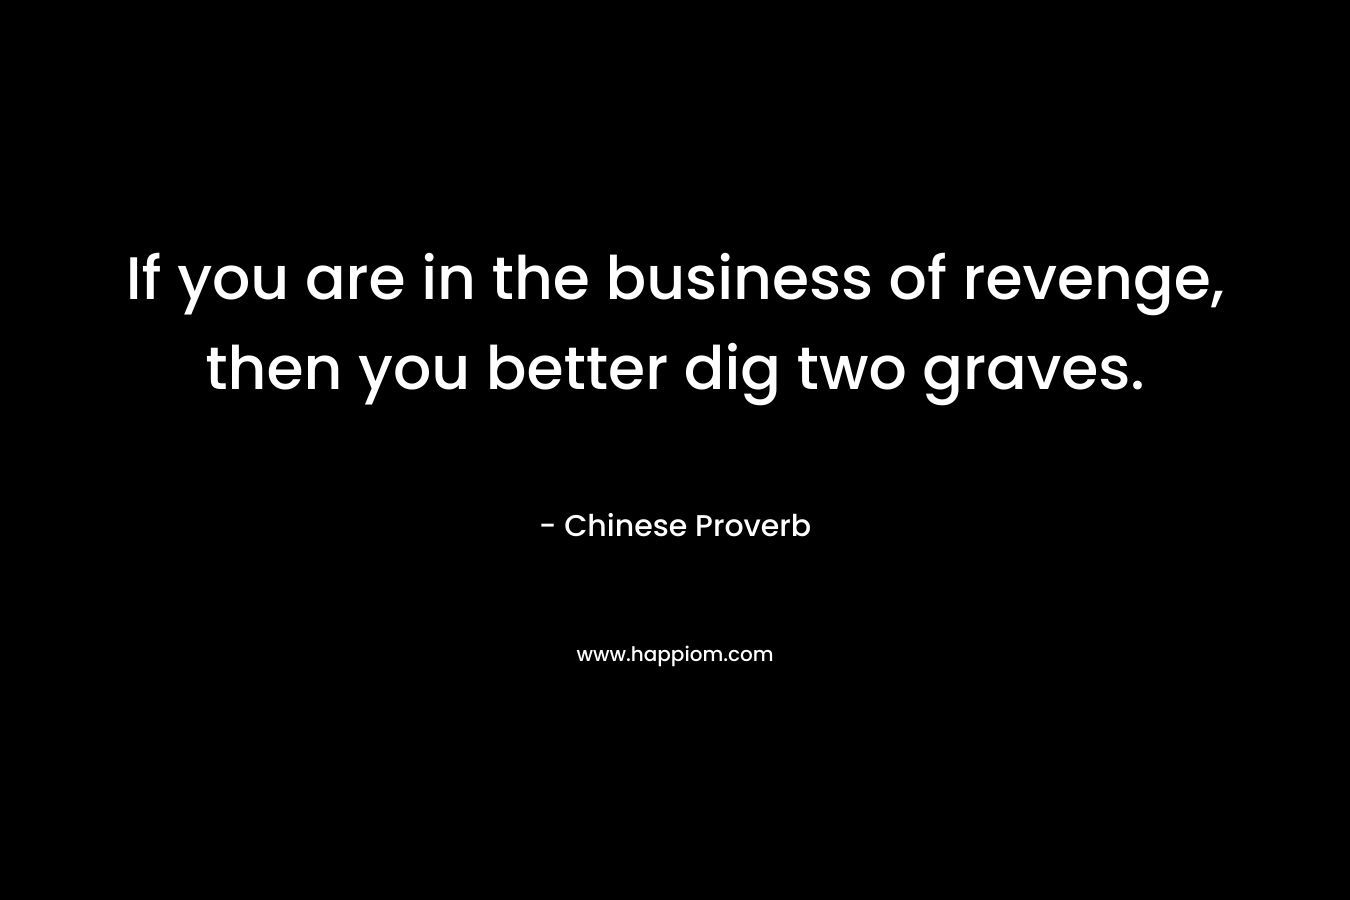 If you are in the business of revenge, then you better dig two graves.